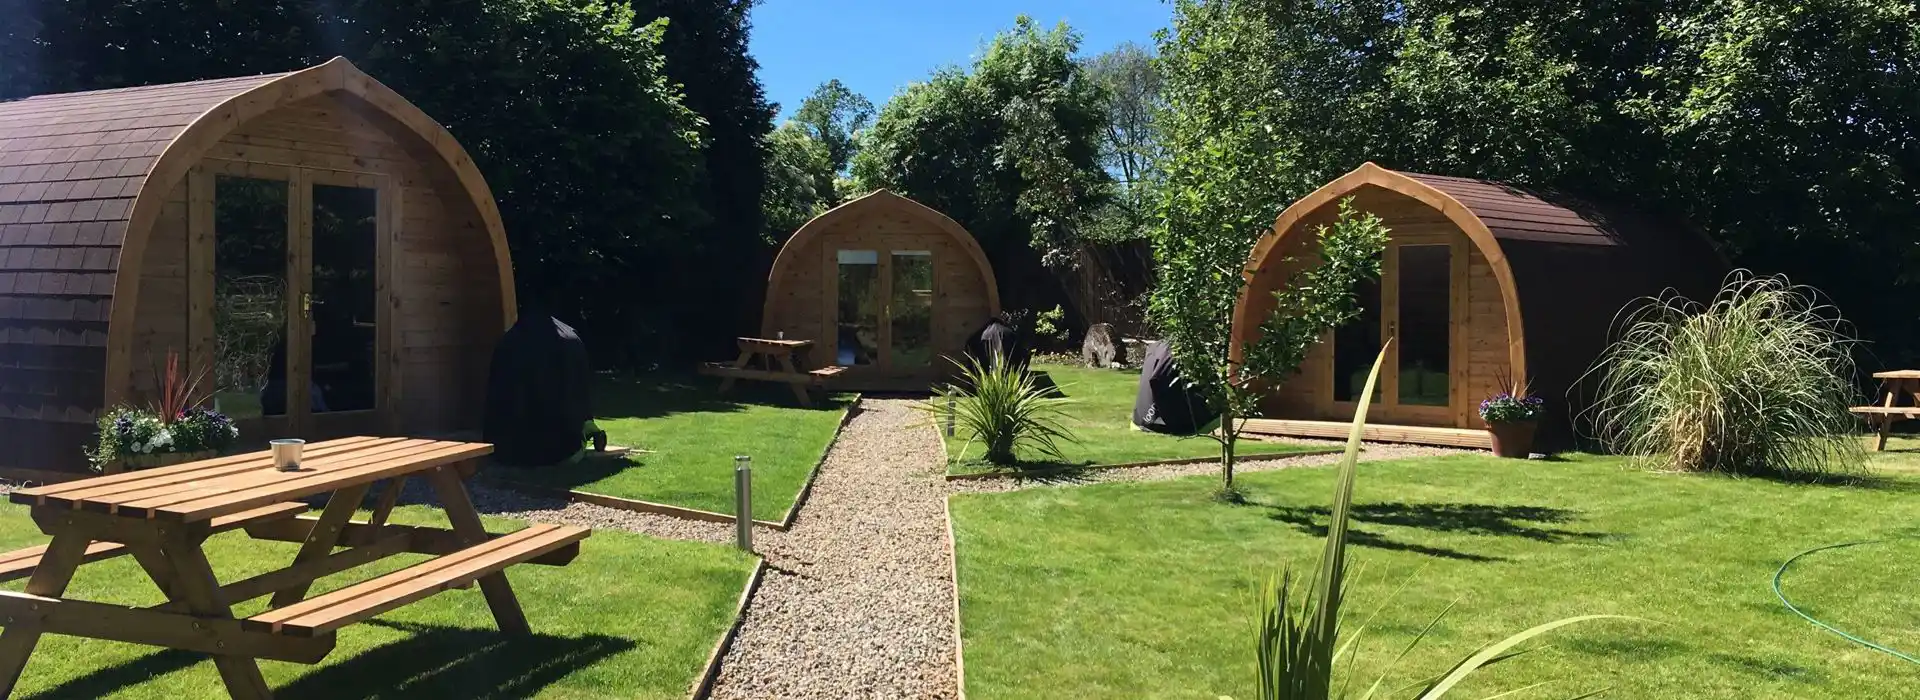 Glamping in County Durham